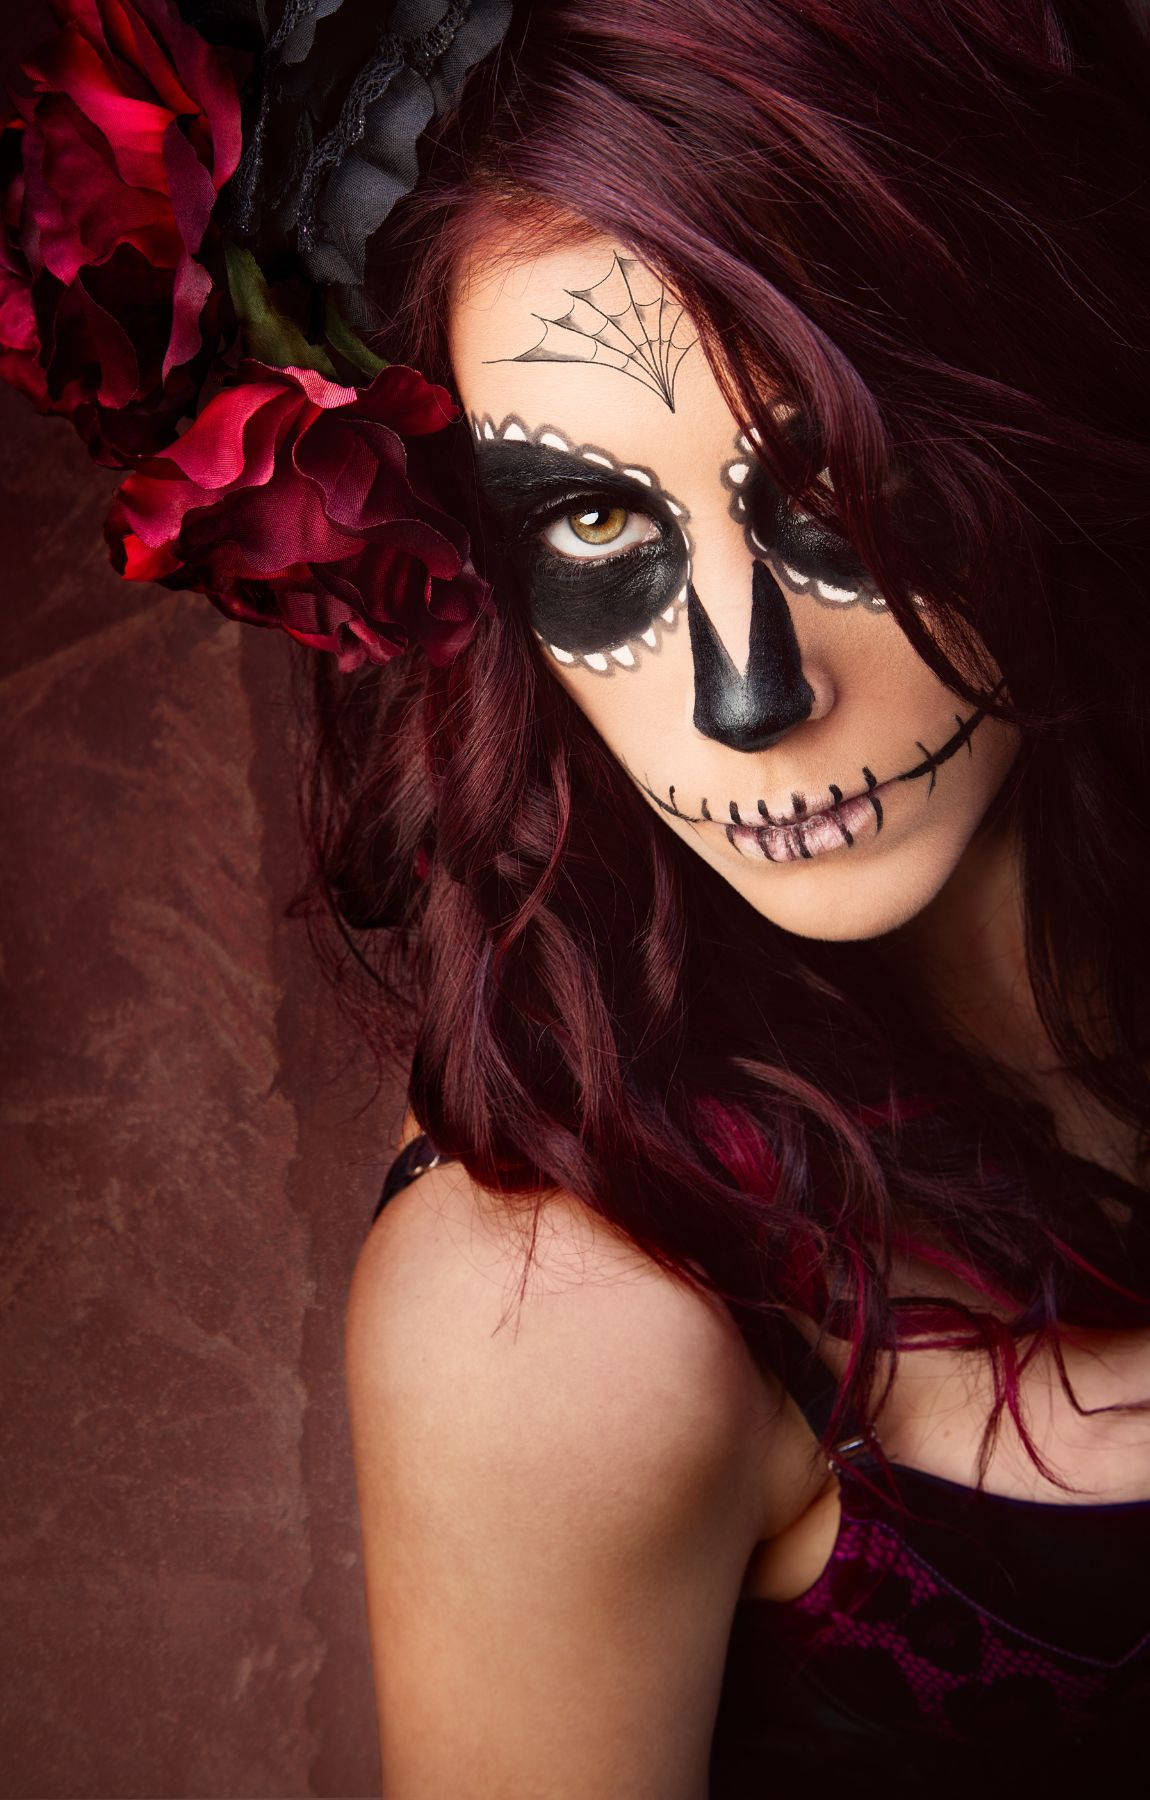 A Woman With Sugar Skull Makeup And Flowers Wallpaper